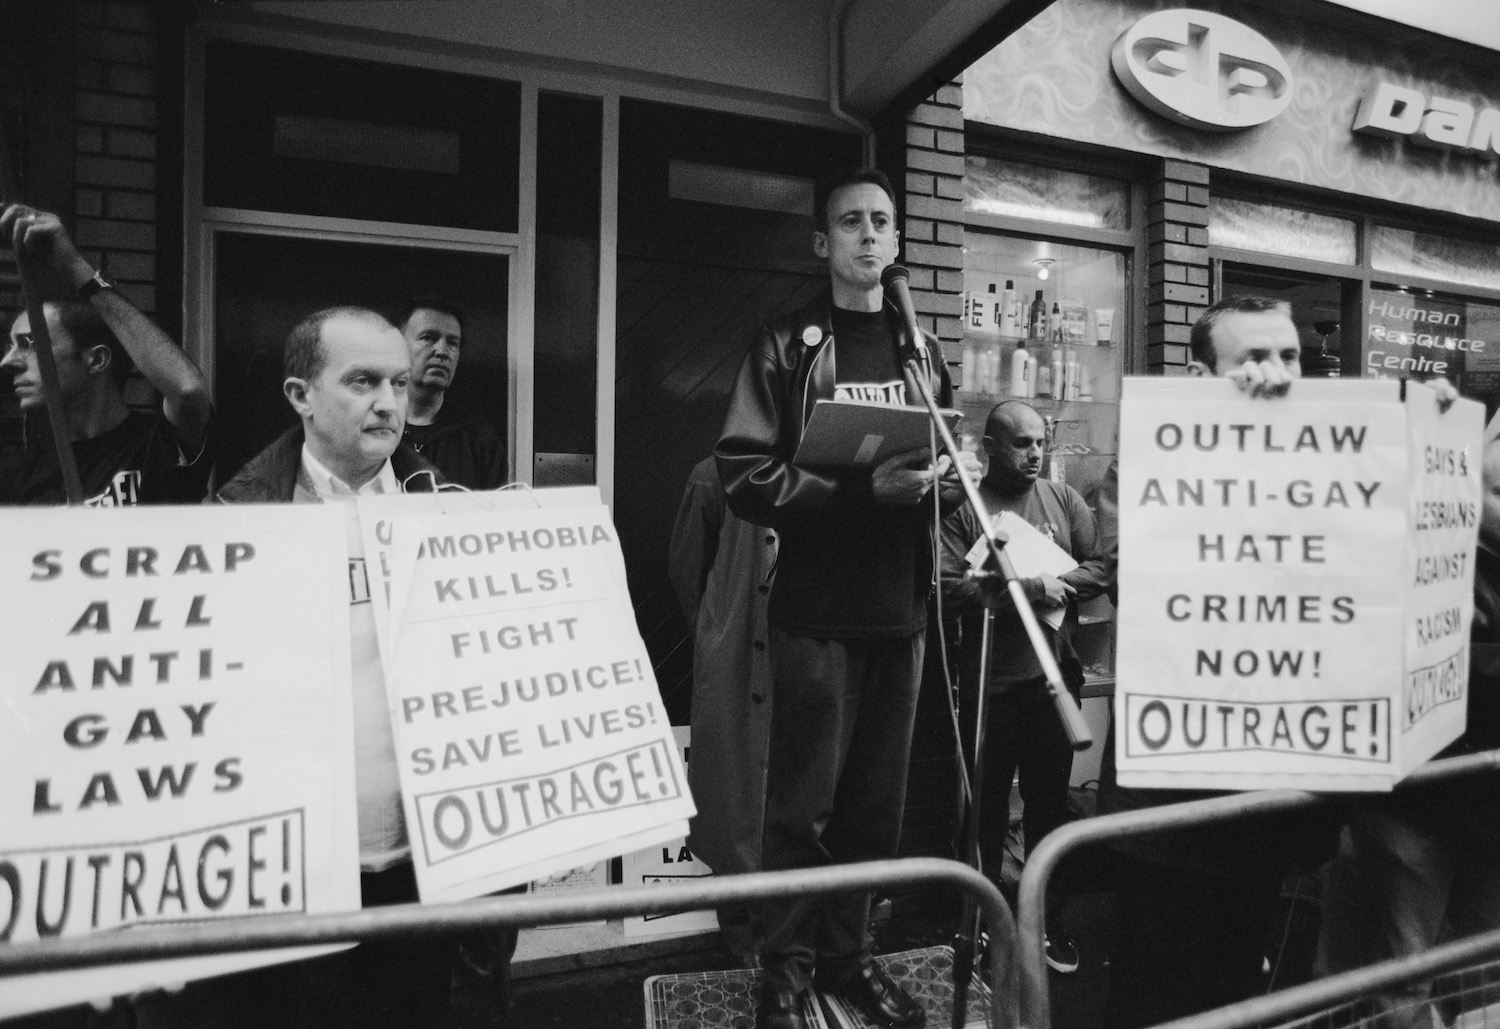 Human rights activist Peter Tatchell (centre) at a vigil organized by the direct action gay rights campaigning group OutRage! in Old Compton Street, Soho, London, 7th May 1999. The gathering follows the bombing of the Admiral Duncan, a gay pub on the street, by Neo-Nazi David Copeland on April 30th. (Photo by Steve Eason/Getty Images)